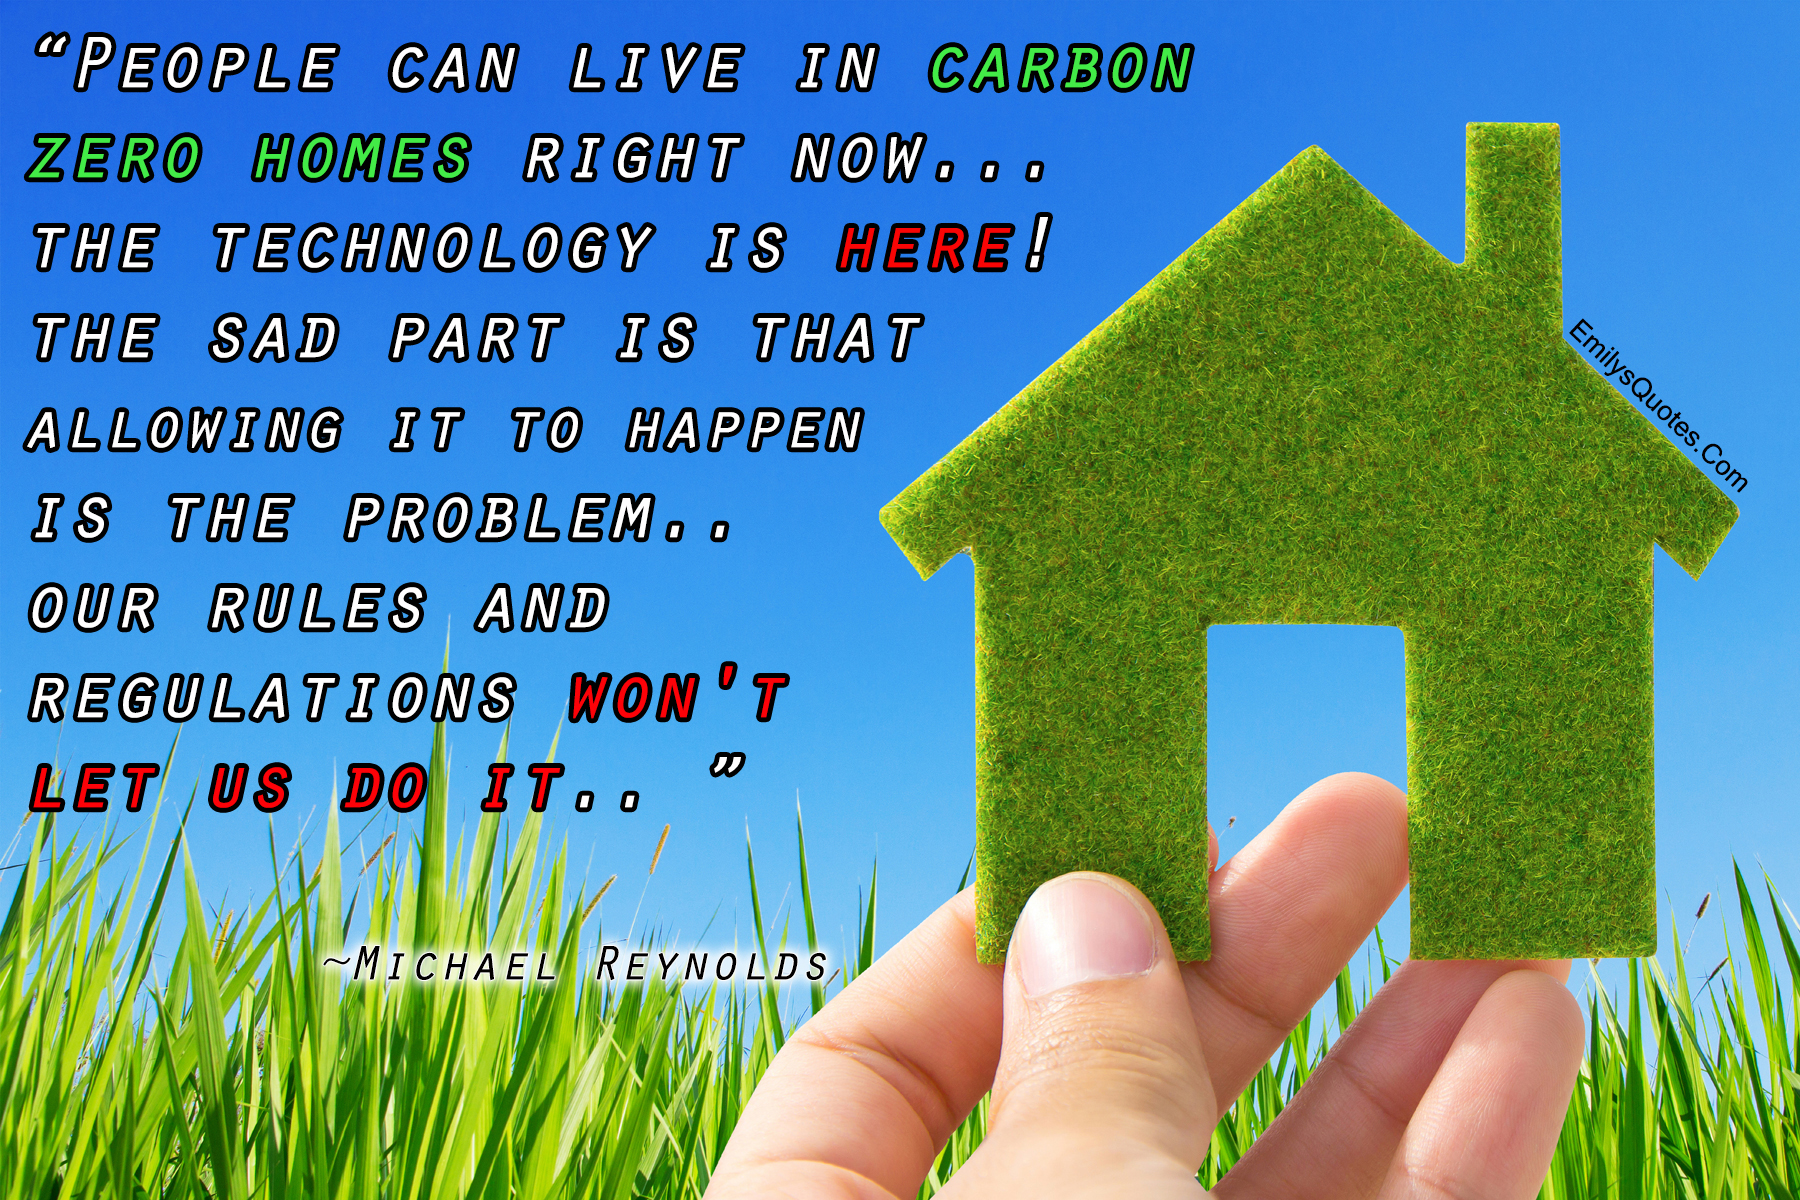 People can live in carbon zero homes right now… the technology is here! The sad part is that allowing it to happen is the problem.. Our rules and regulations won’t let us do it